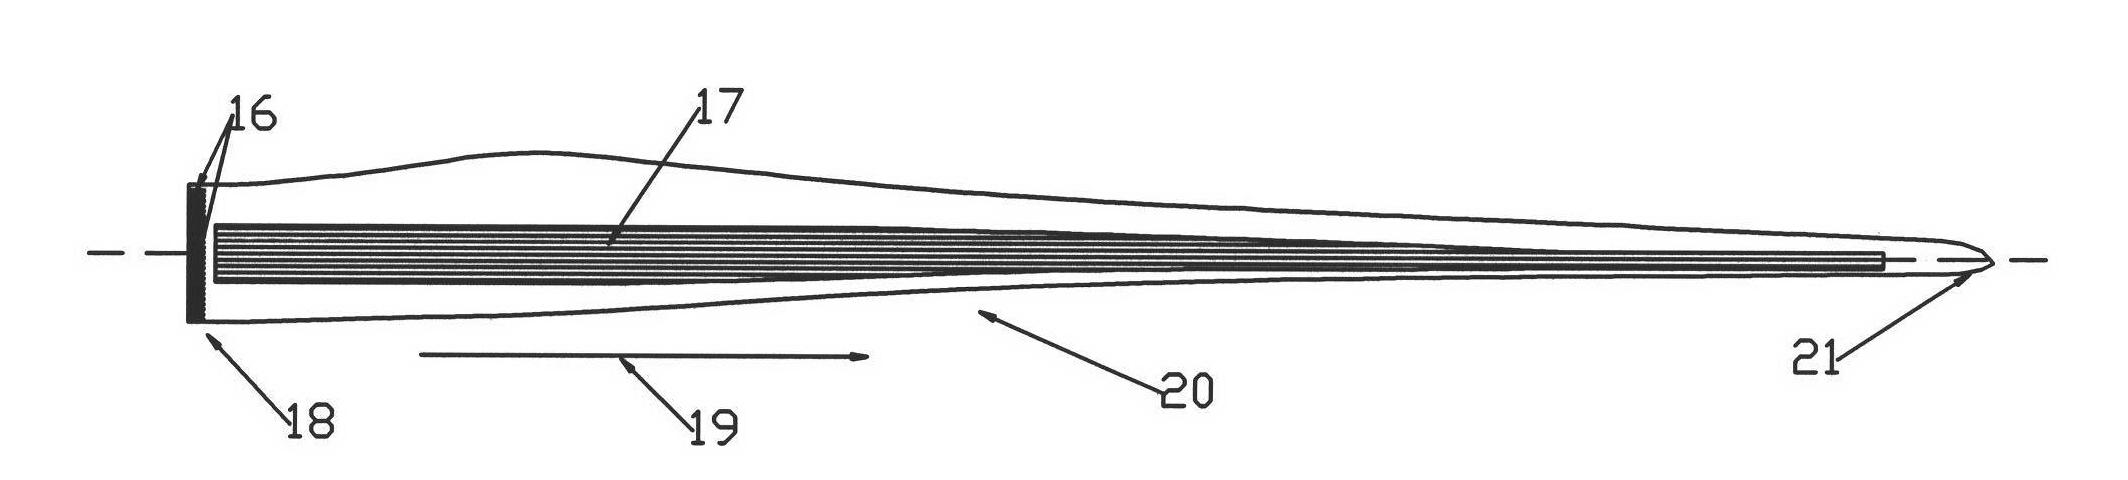 Blade root structure made of bamboo composite material and manufacturing method thereof